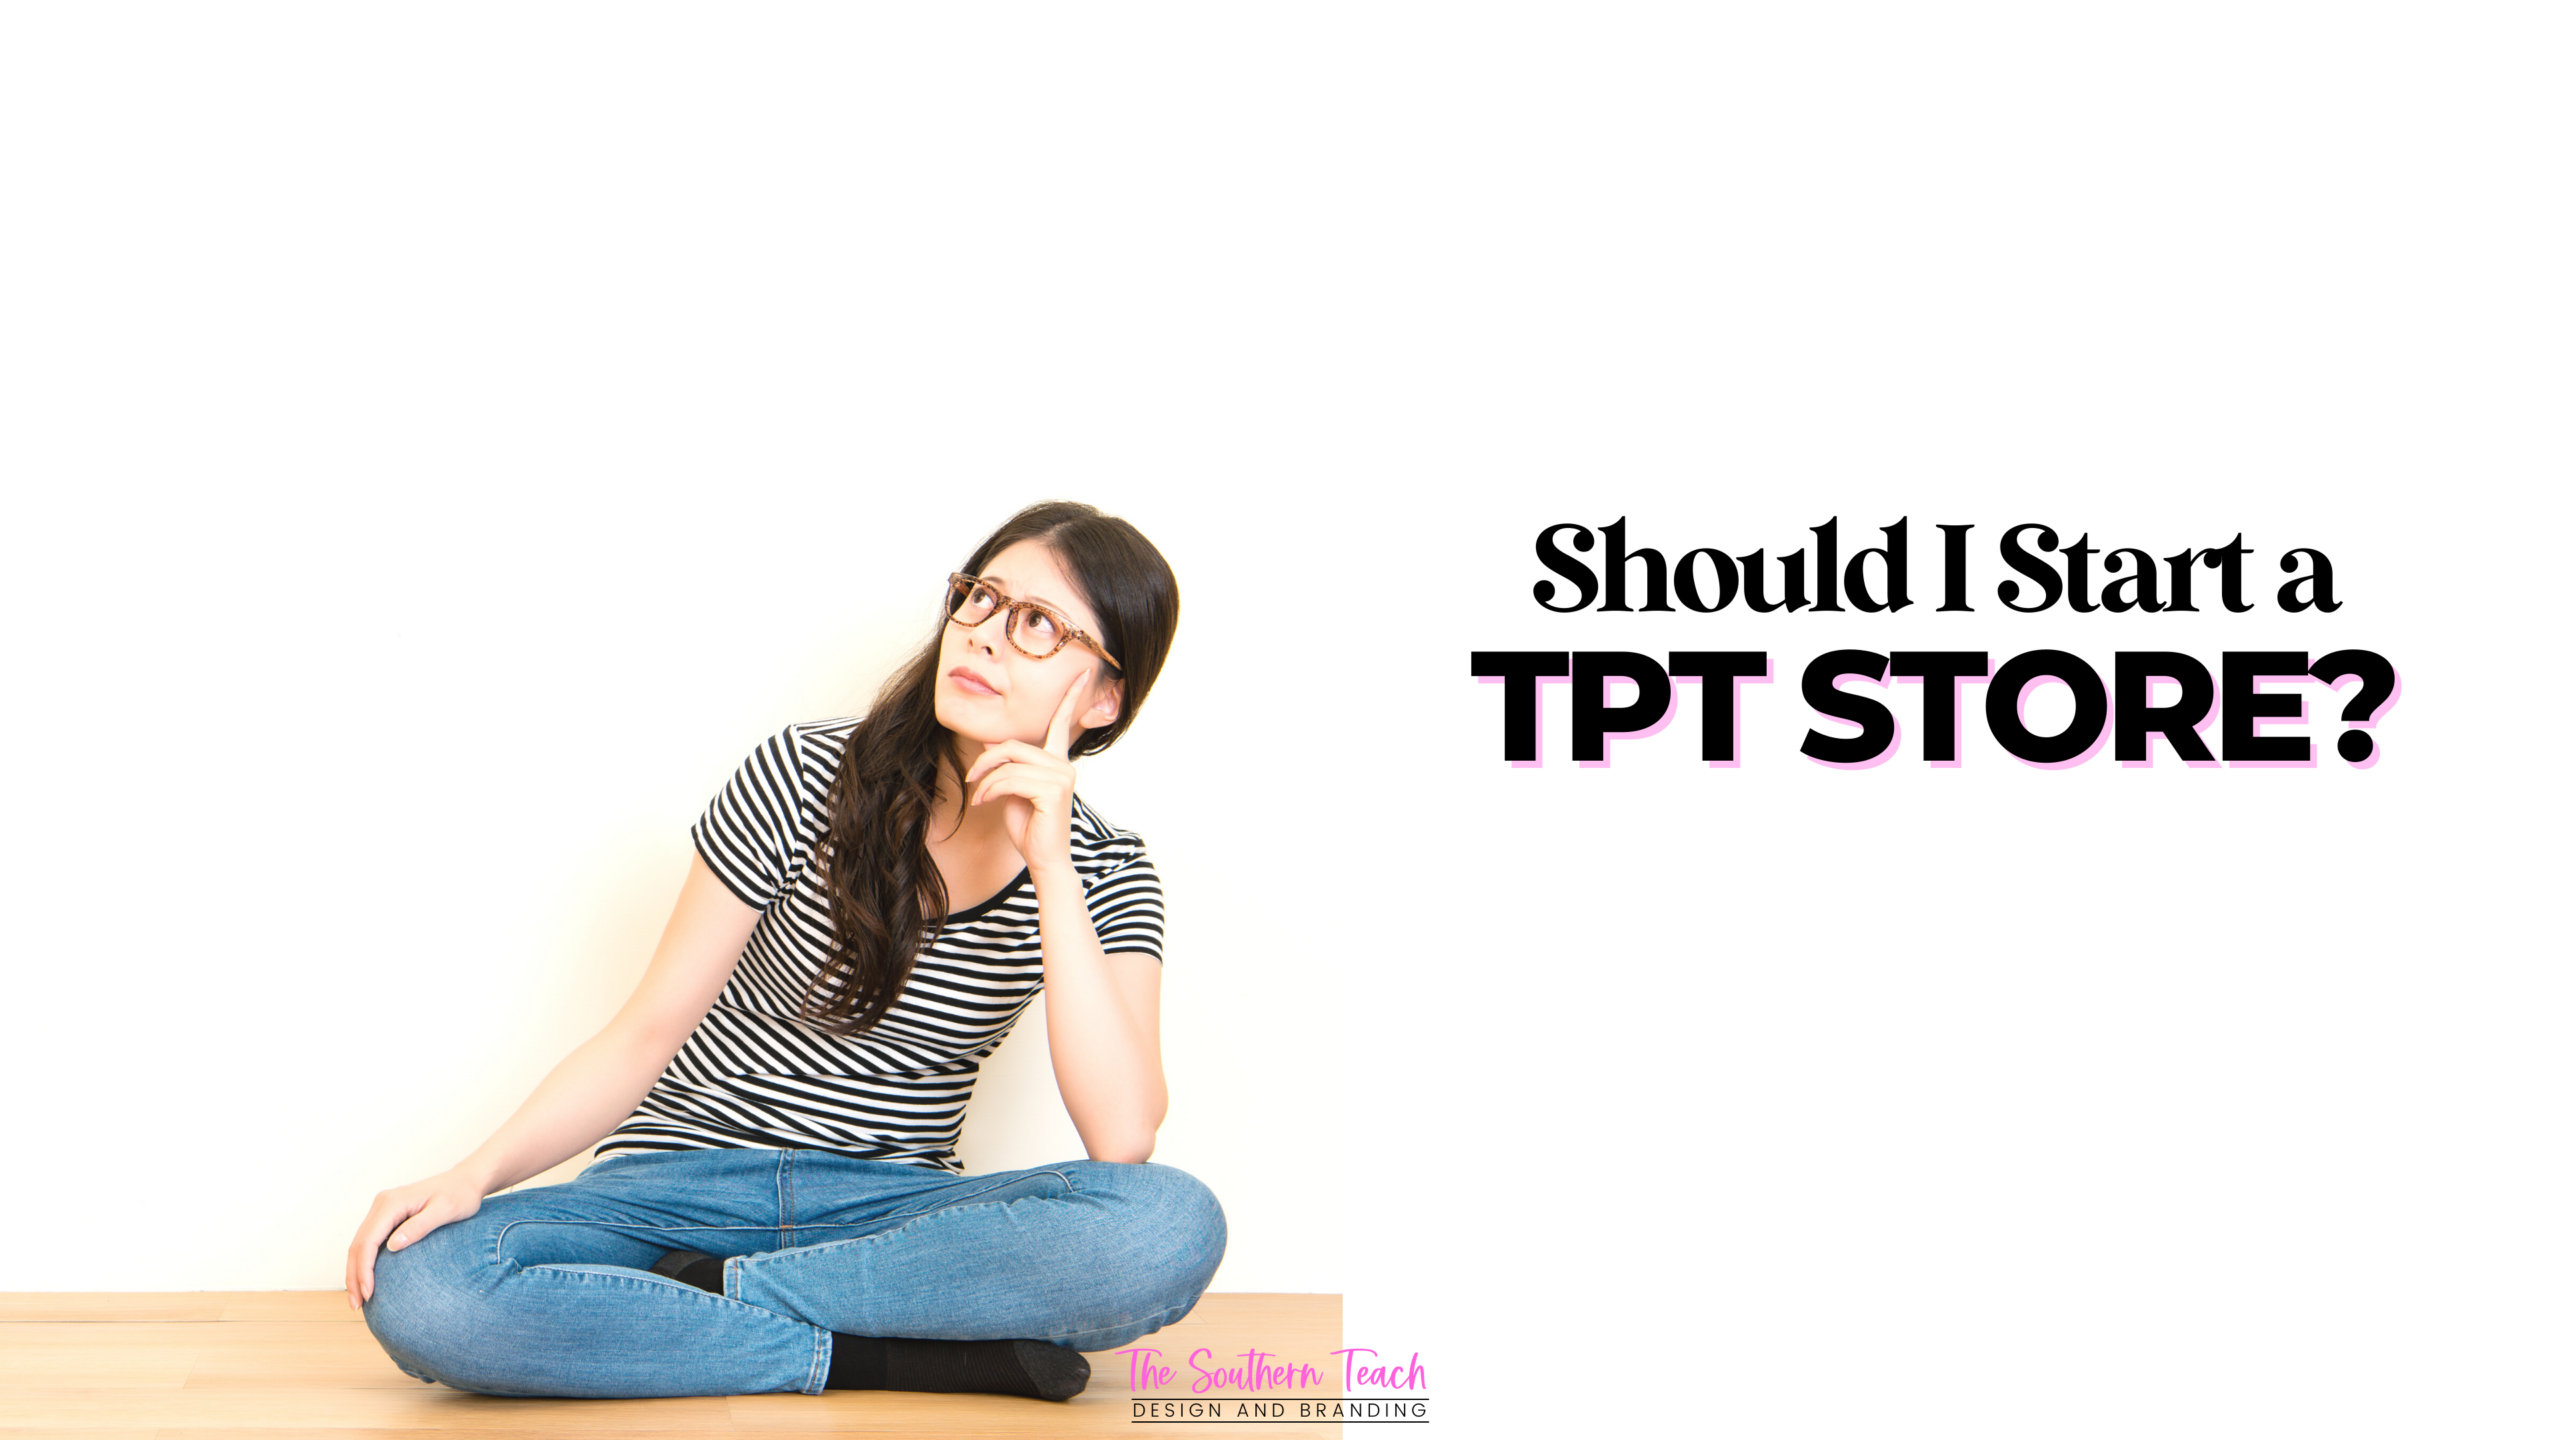 Should You Start a TPT Store?